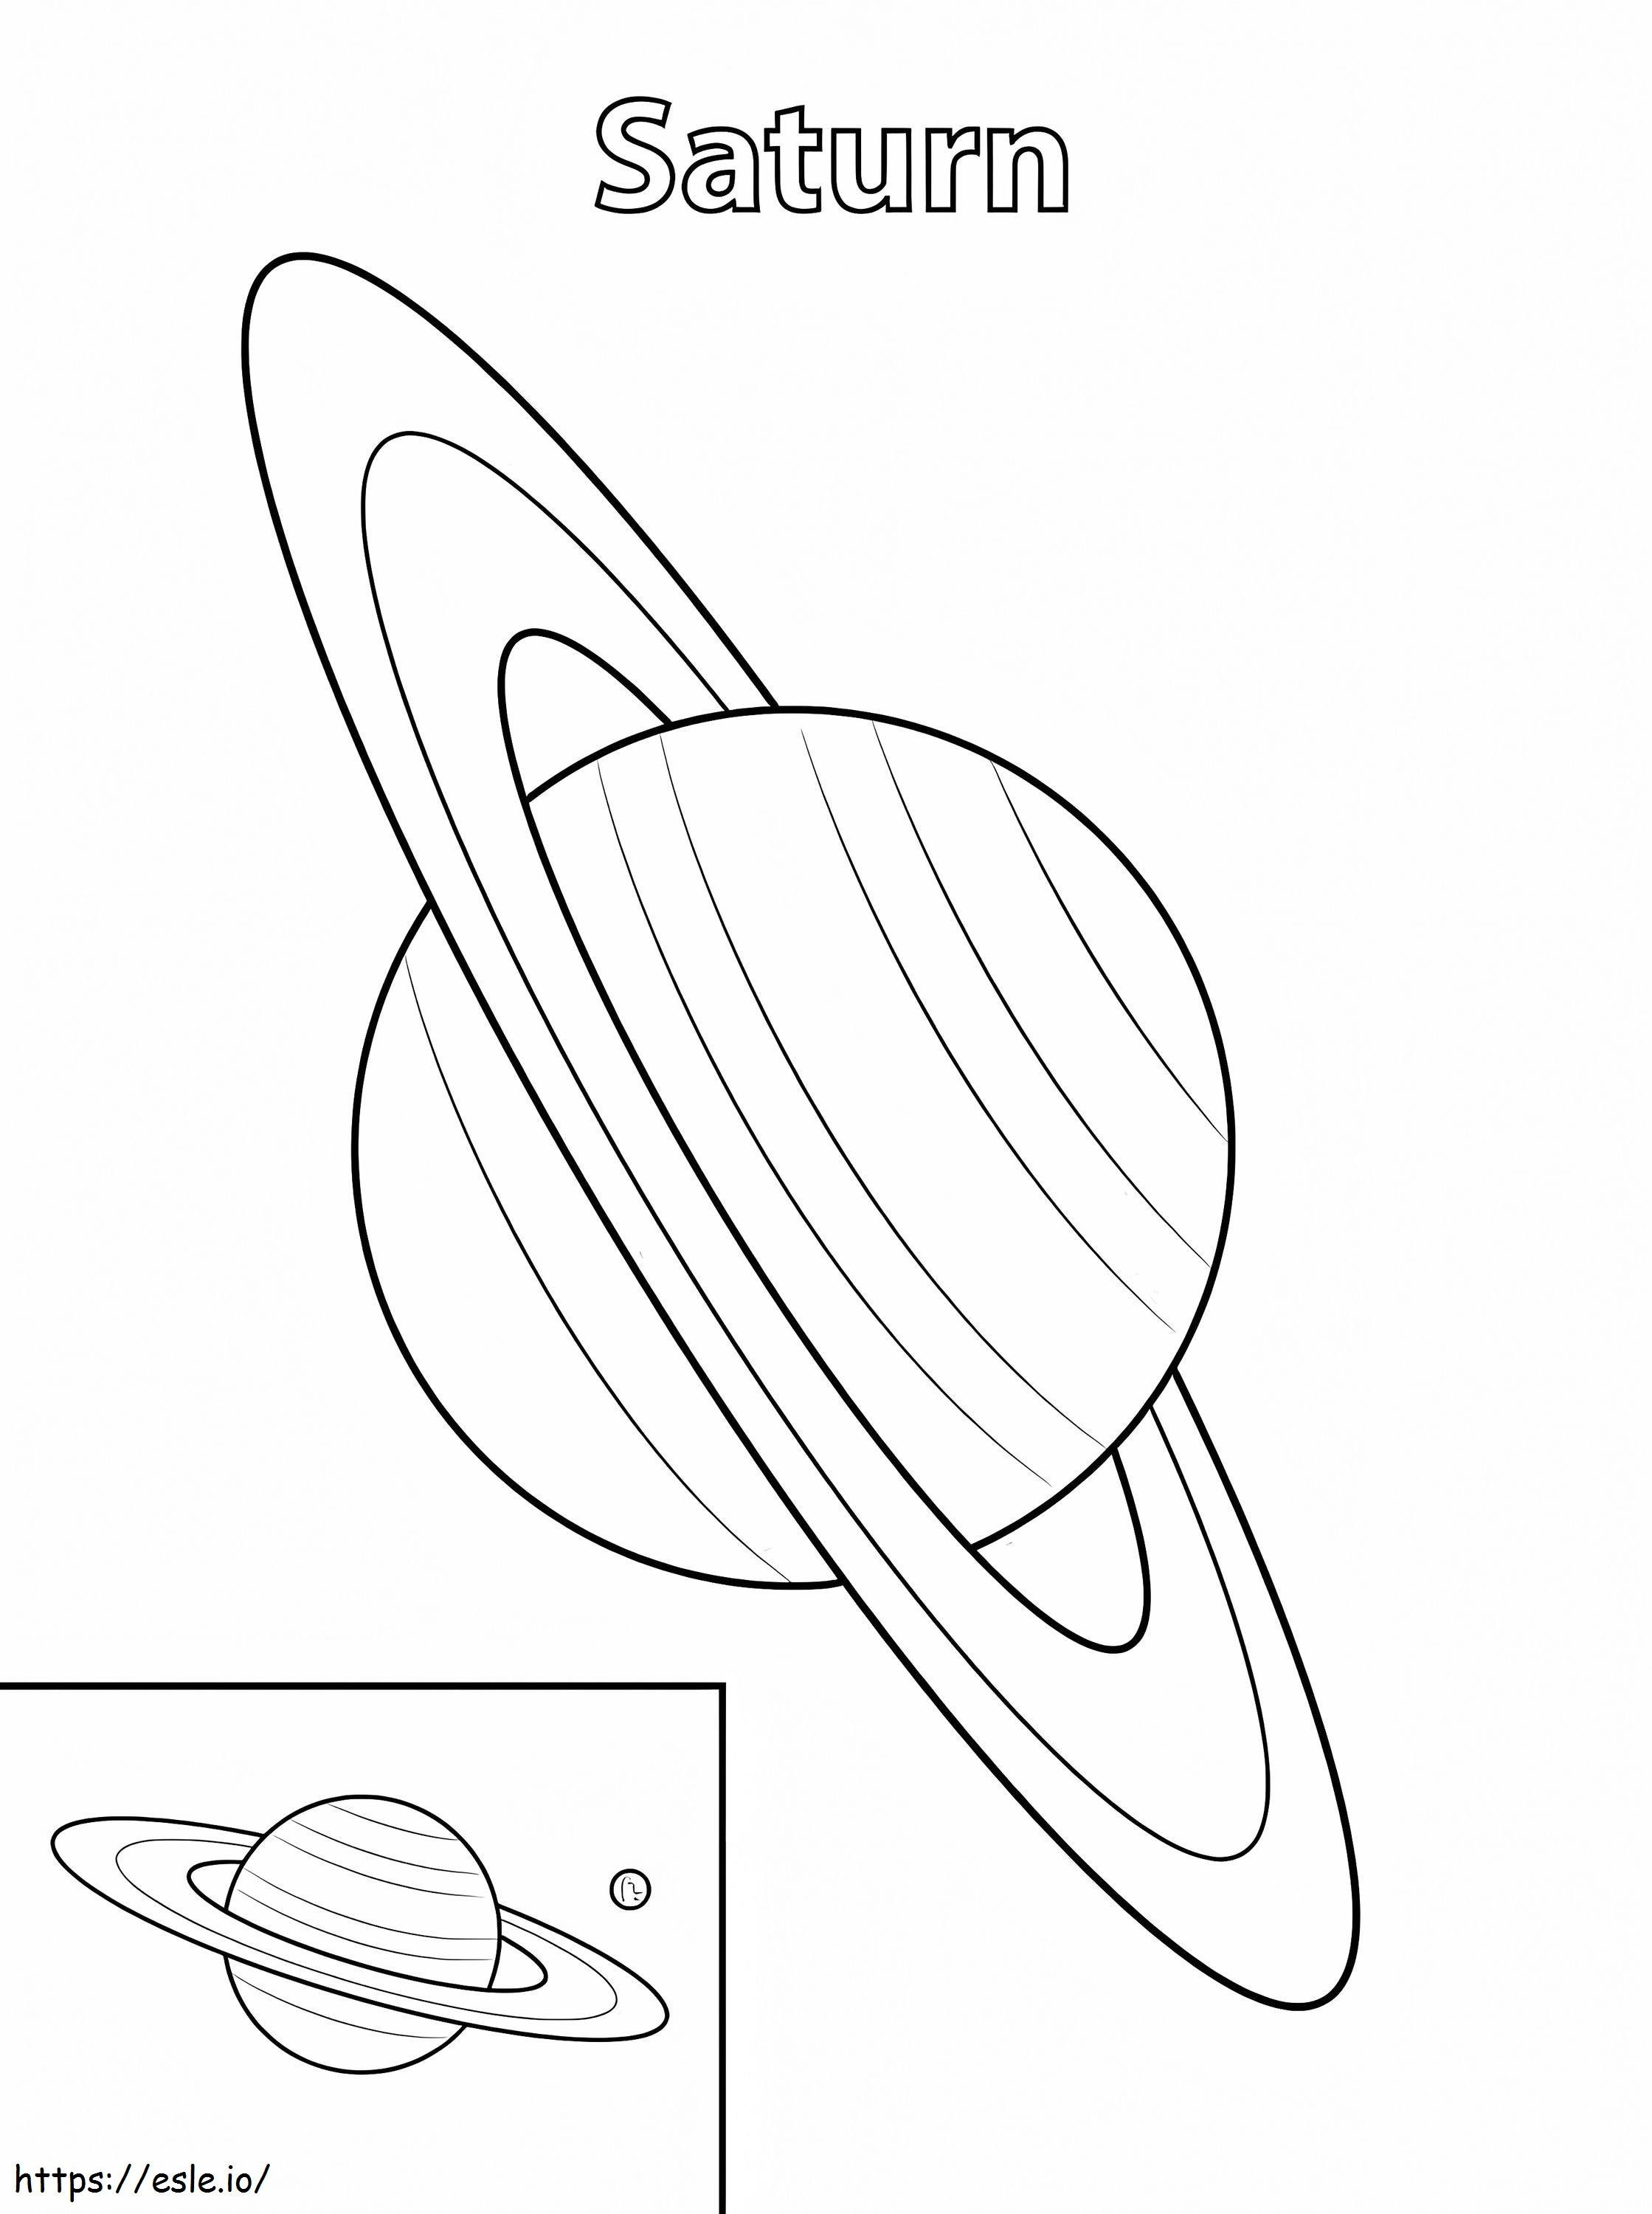 Planet Saturn coloring page